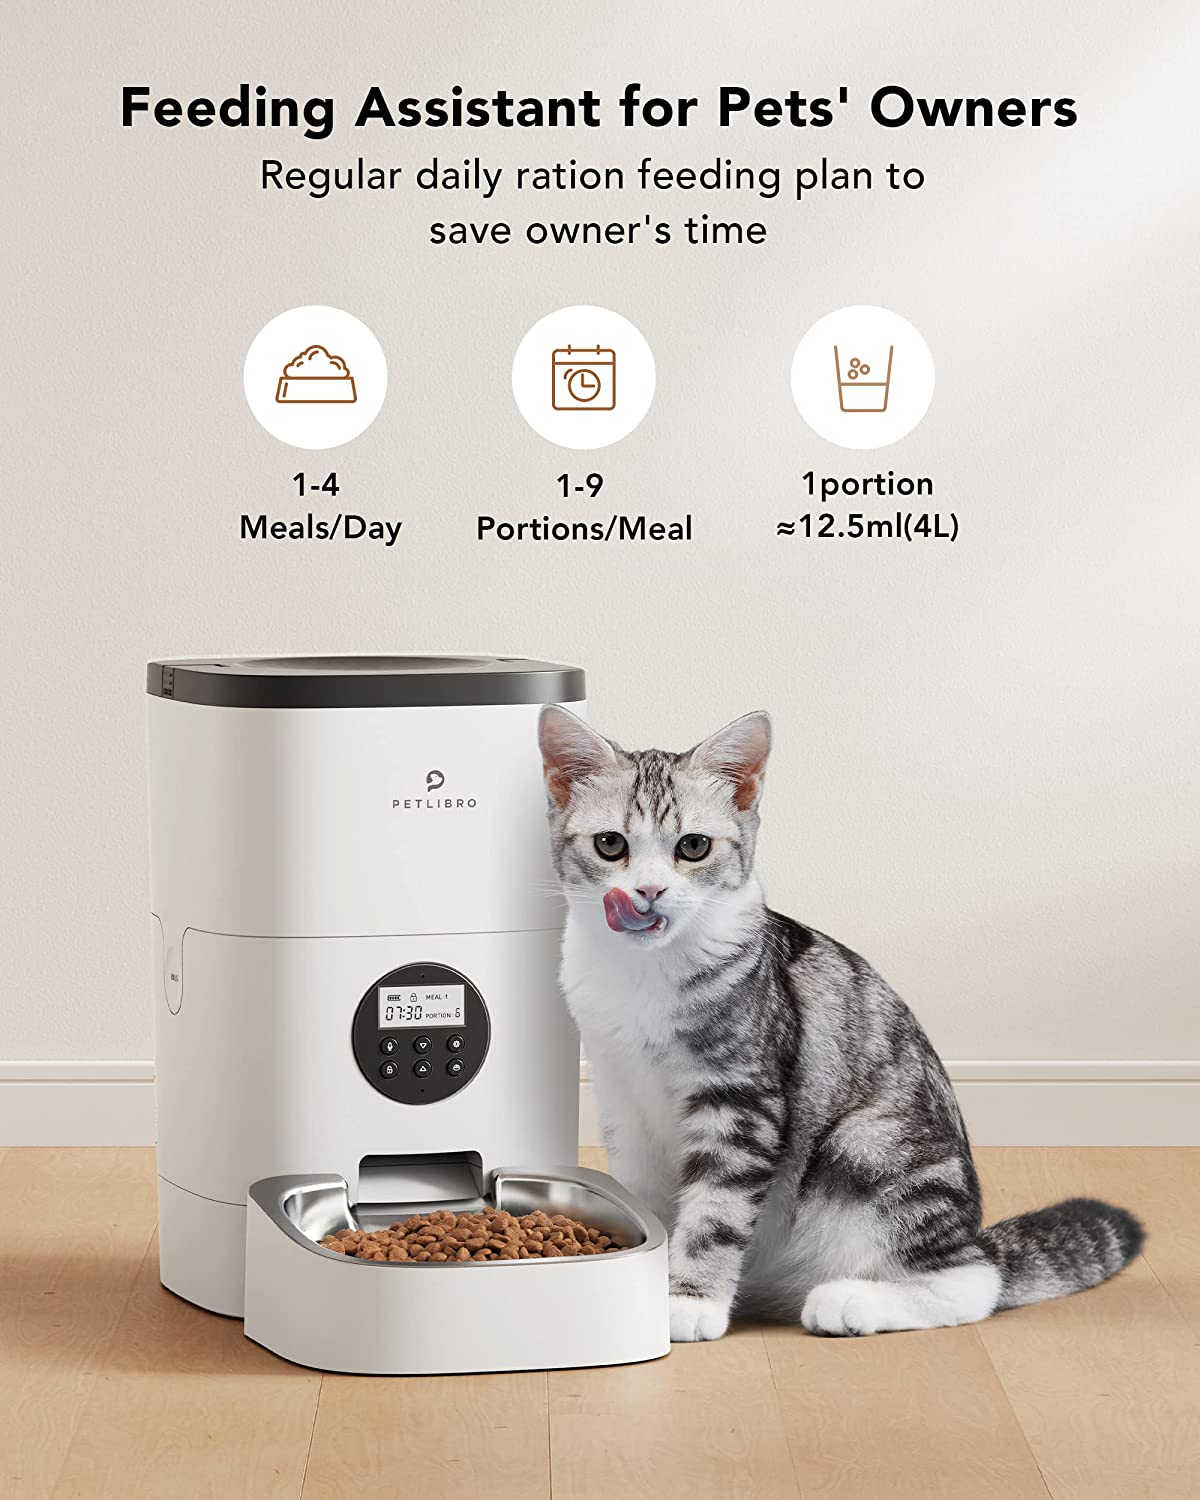 This poster showcases the PETLIBRO Automatic Pet Feeders For Cats & Dogs with it's number of meals per day with size and quantity it can hold and serve, Image has a Cute White/Black Cat standing next to PETLIBRO Pet Feeder having dispensed meal from the unit and Cat liking it by licking her lips and showing long tongue as she is happy to get served by this product.